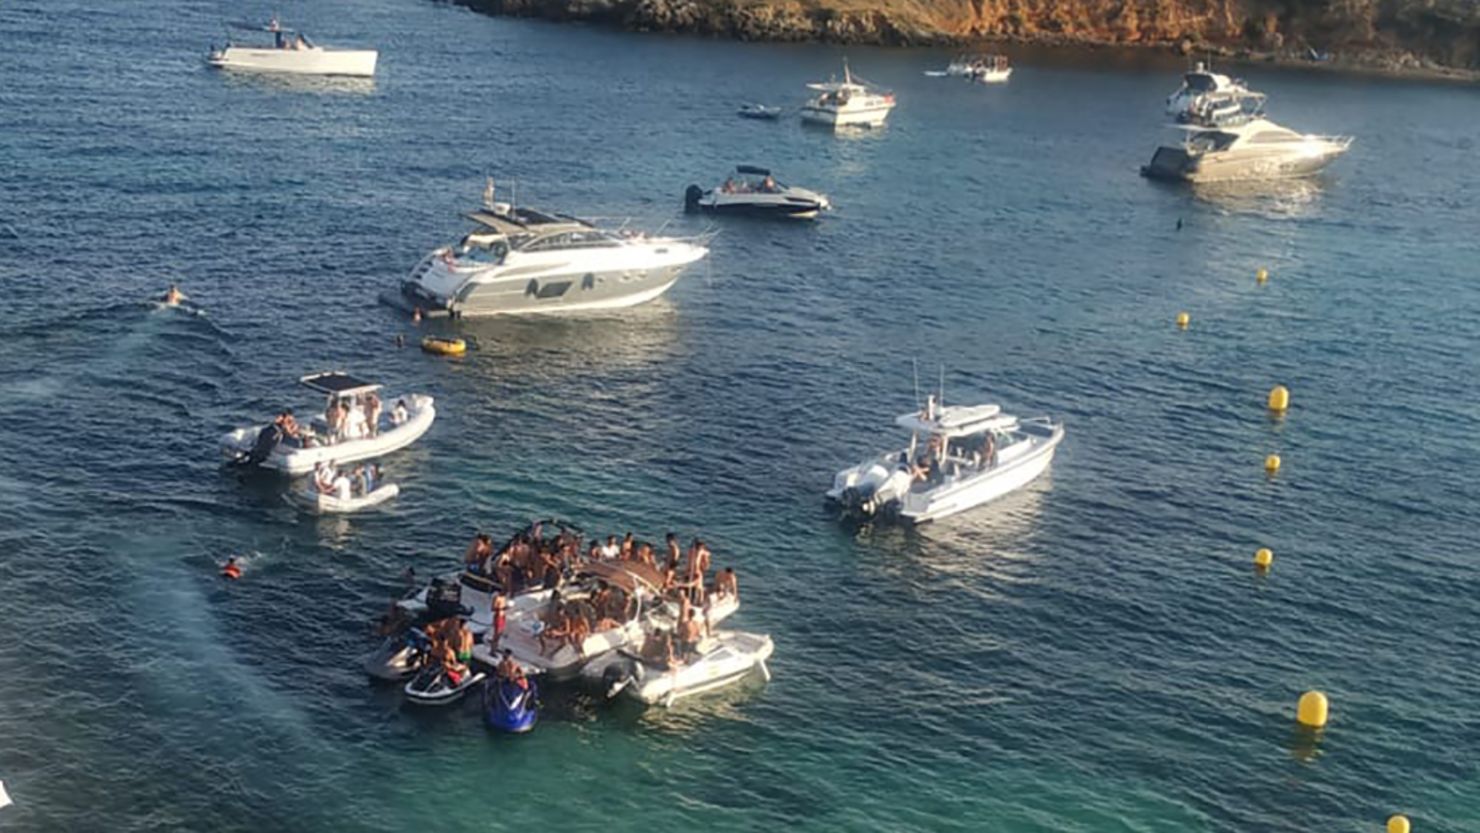 Boat parties are banned under coronavirus rules, but that didn't stop this group in Portals Nous.